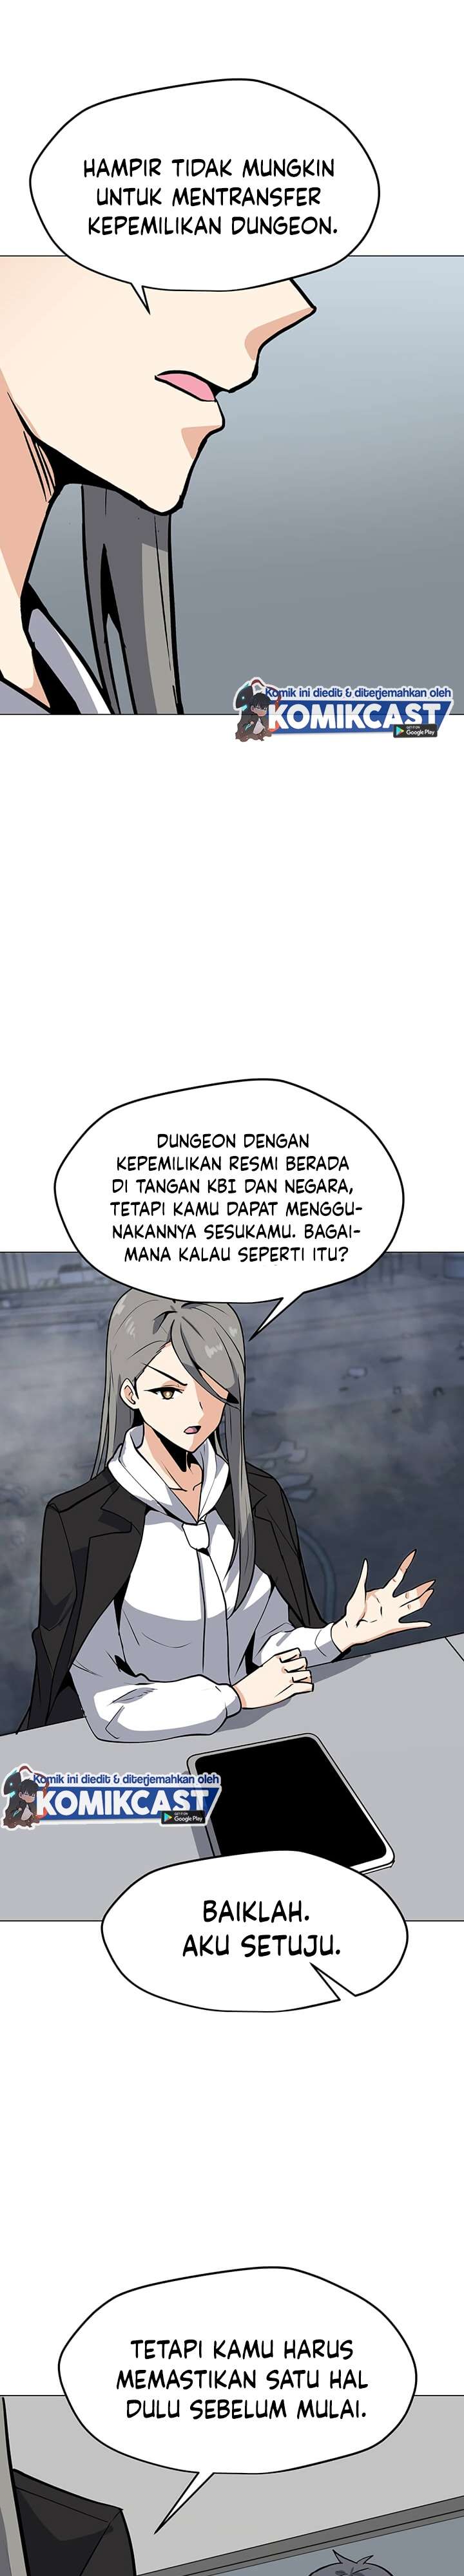 Solo Spell Caster Chapter 47